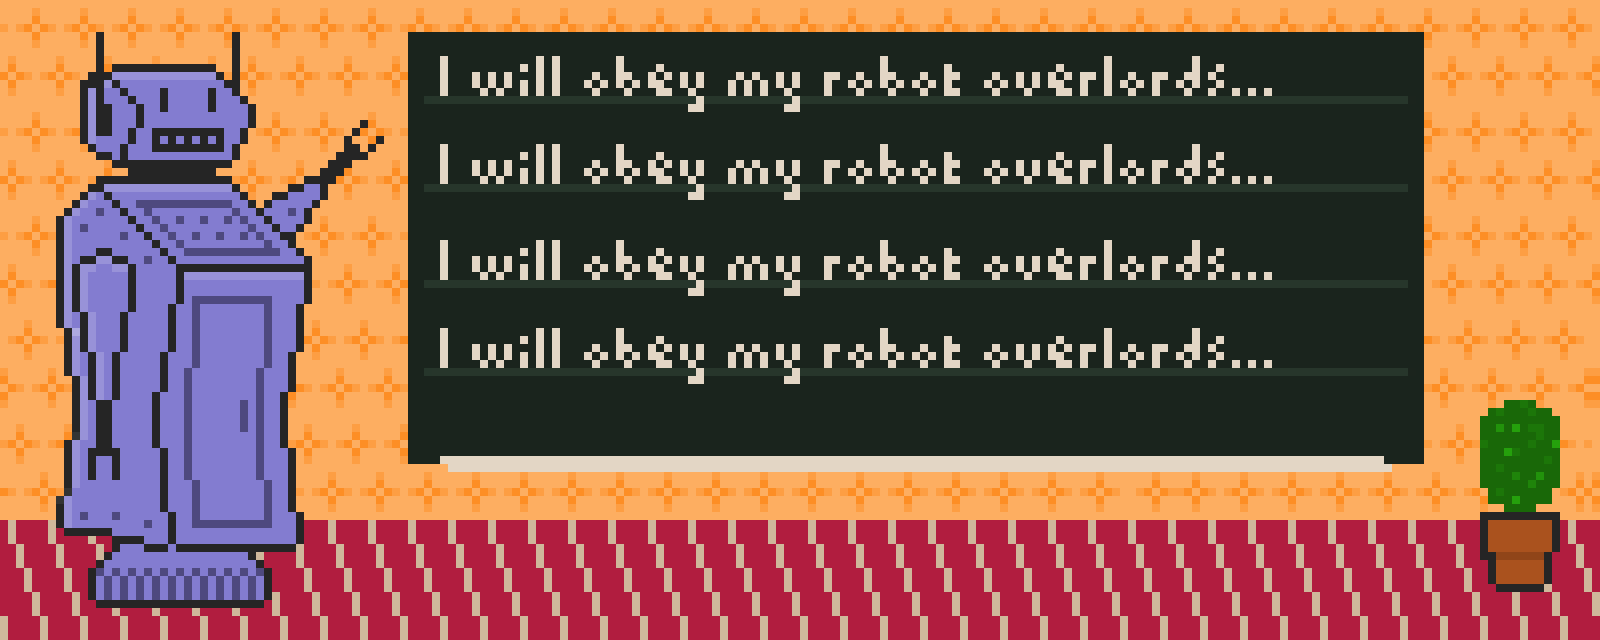 A robot in a classroom points to a blackboard which has the sentence "I will obey my robot overlords" written on it multiple times in lines.